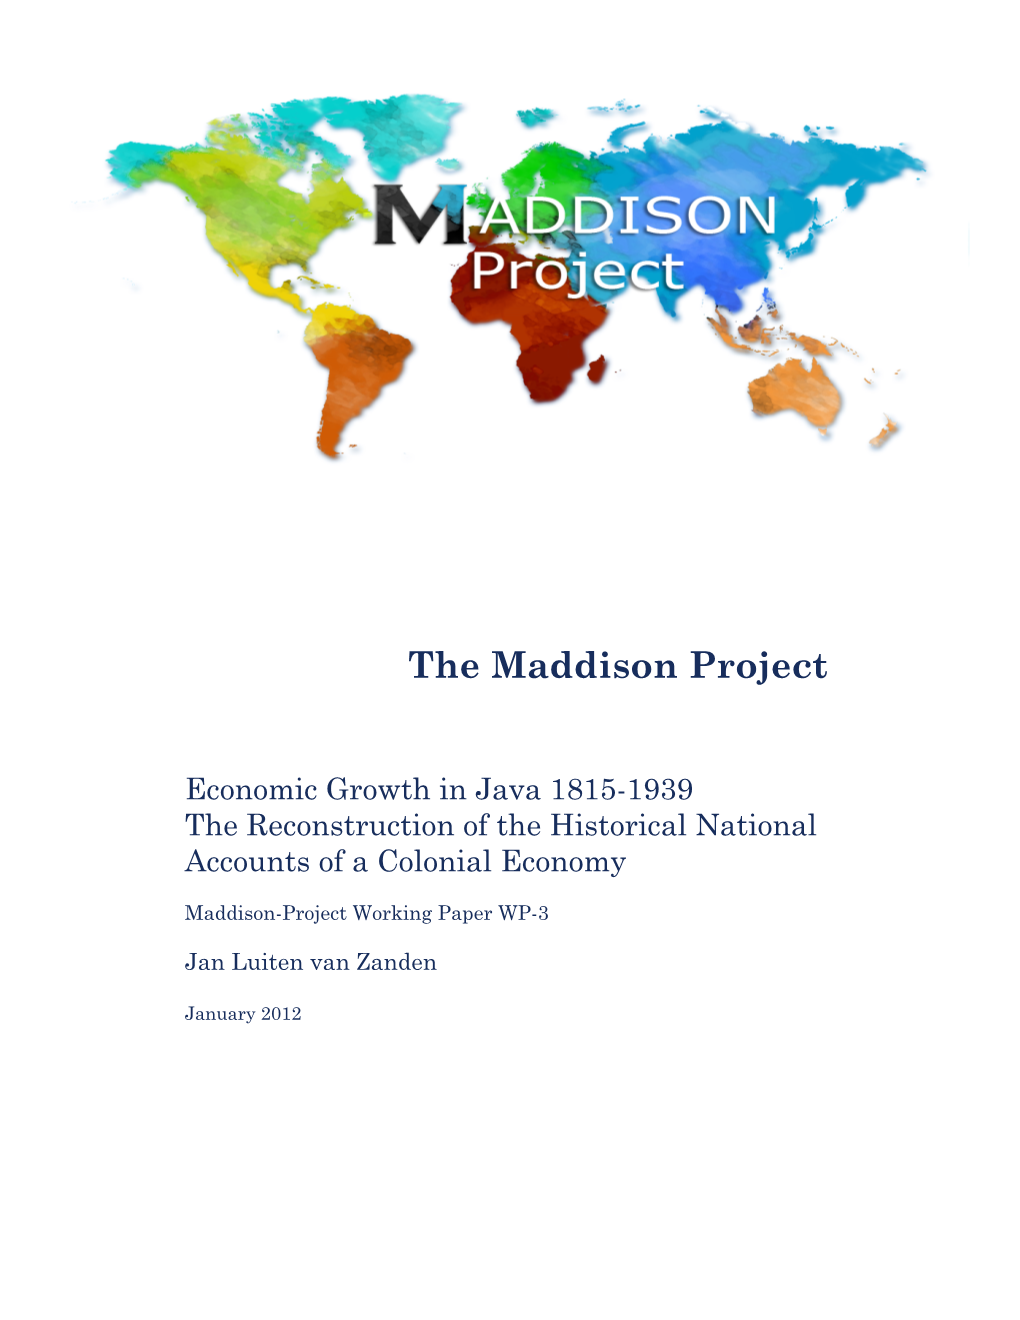 Economic Growth in Java 1815-1939 the Reconstruction of the Historical National Accounts of a Colonial Economy